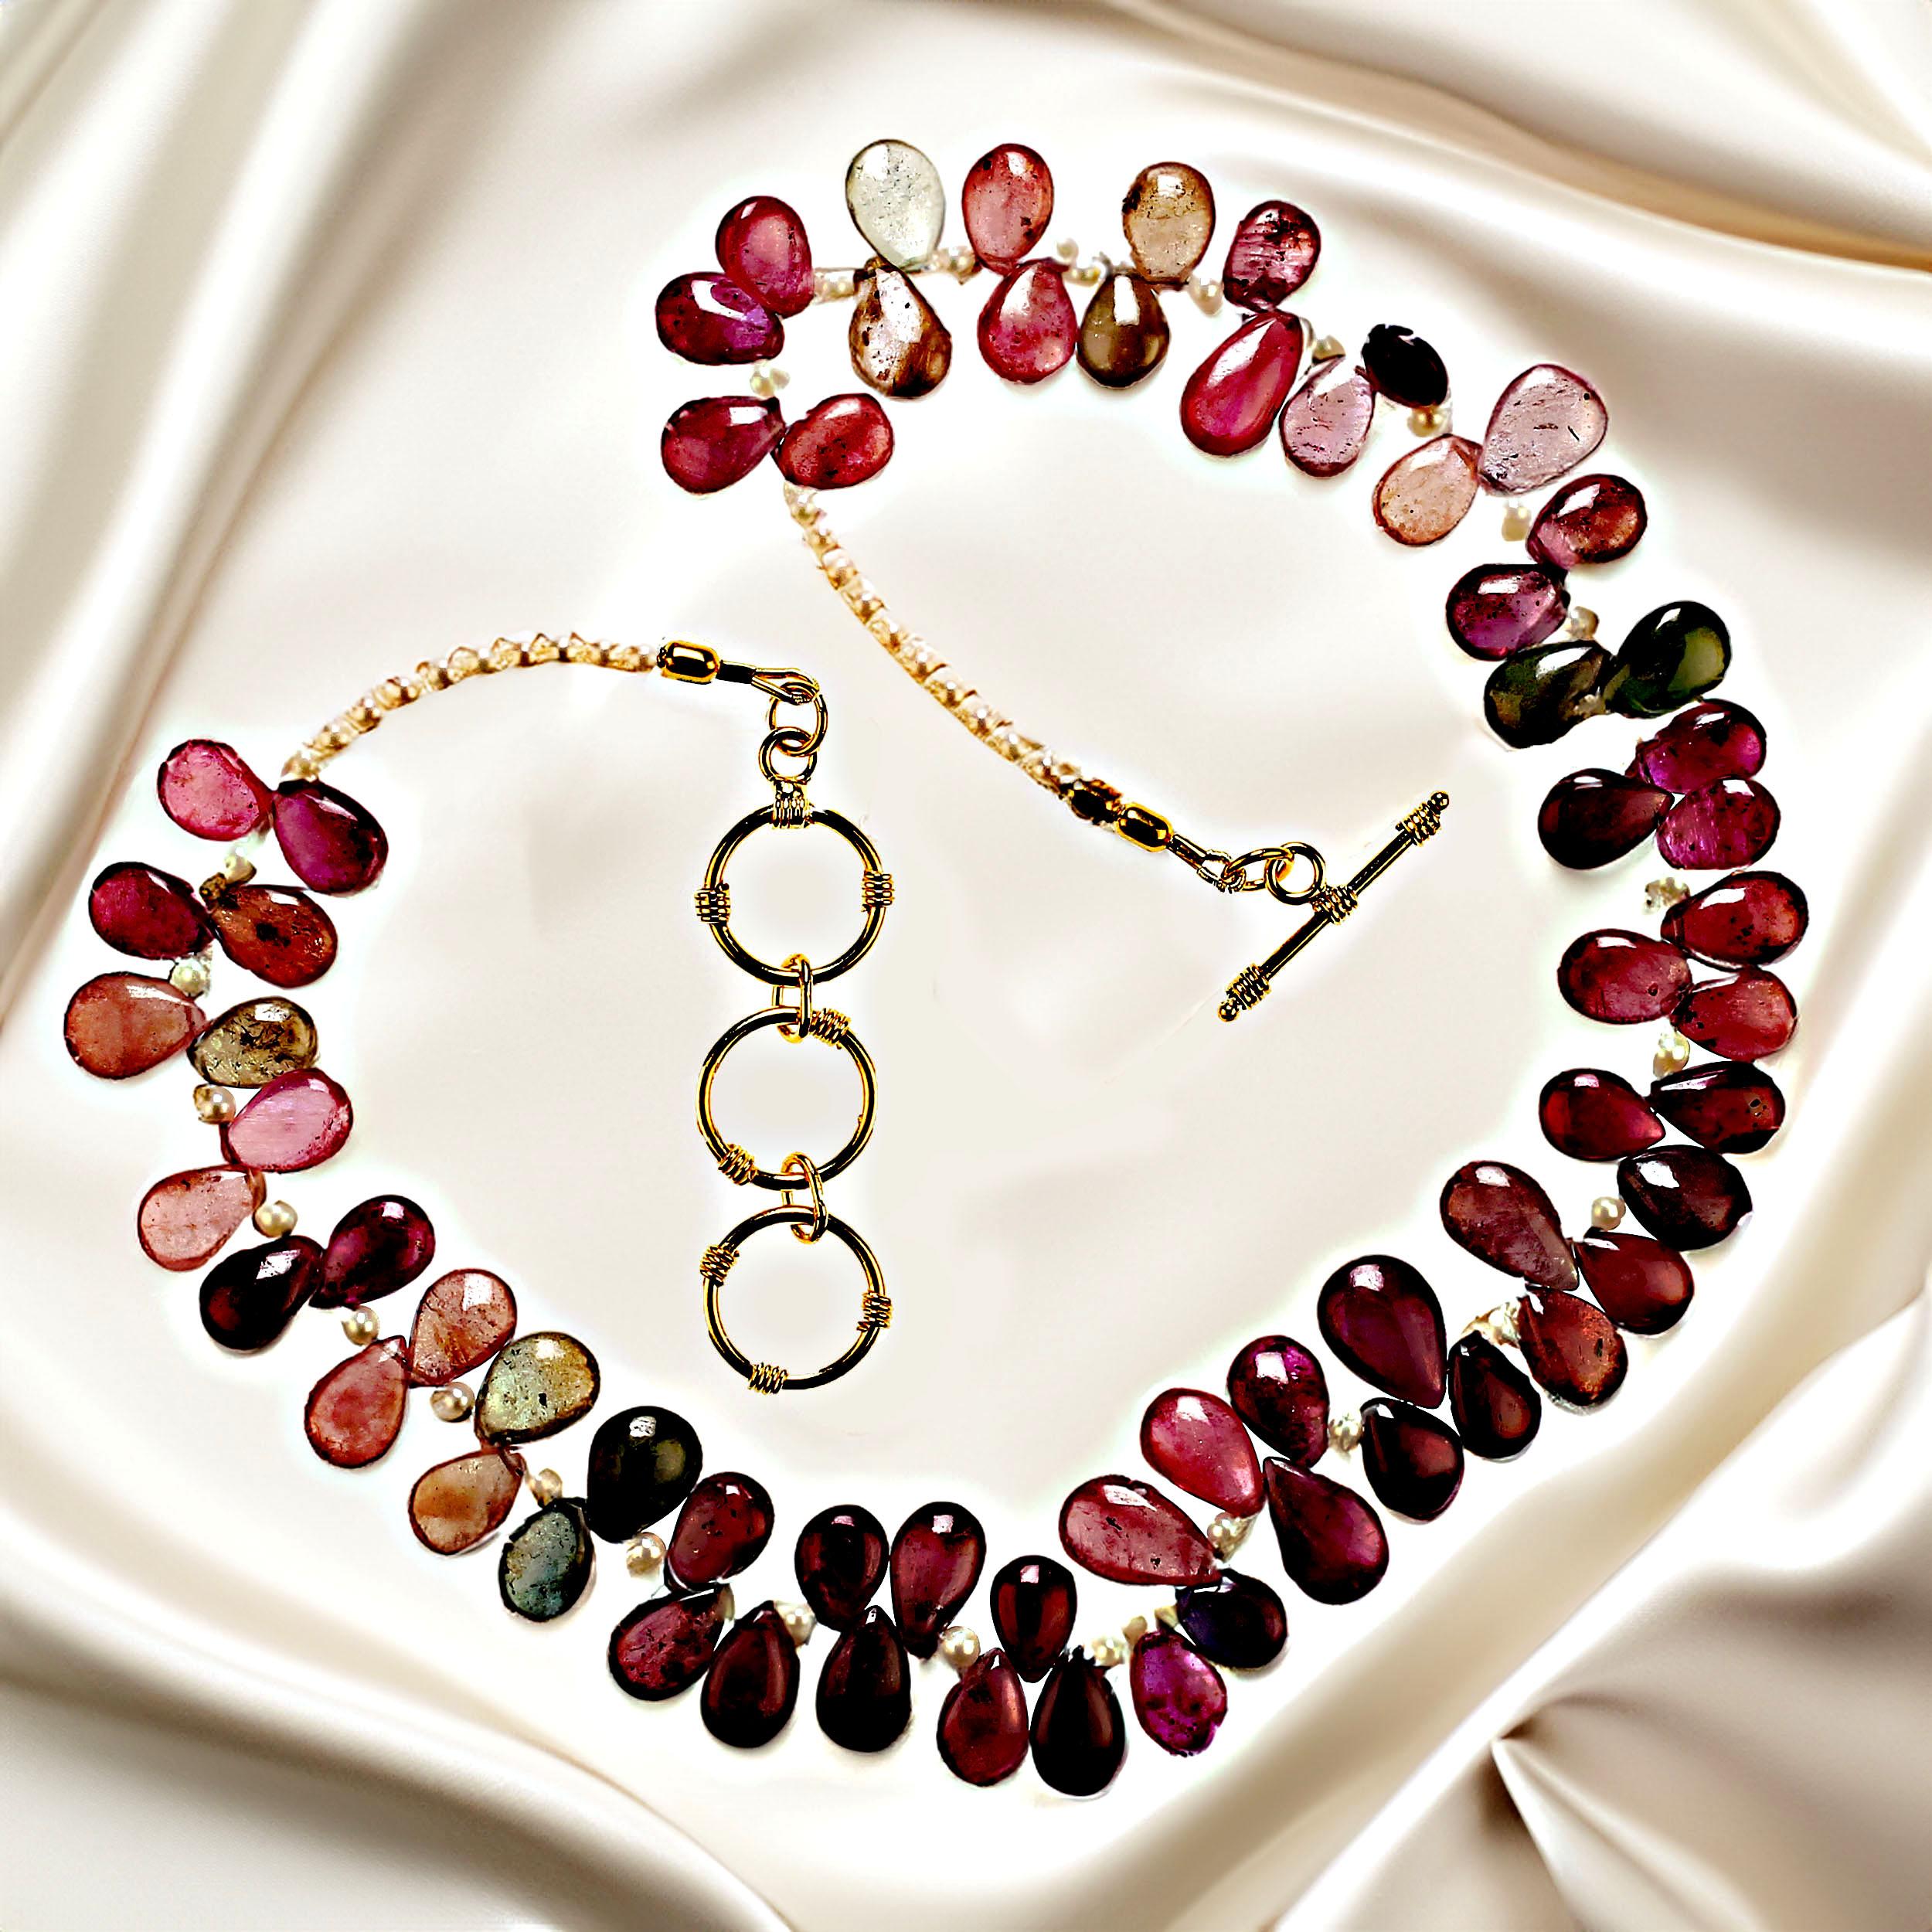 18 Inch gorgeous sapphire necklace in smooth briolette that graduate 11-13.5mm in predominately pinks and deep reds, with accents of white seed pearls.  This unique necklace is secured with a gold plate three ring expandable toggle clasp.  MN2361